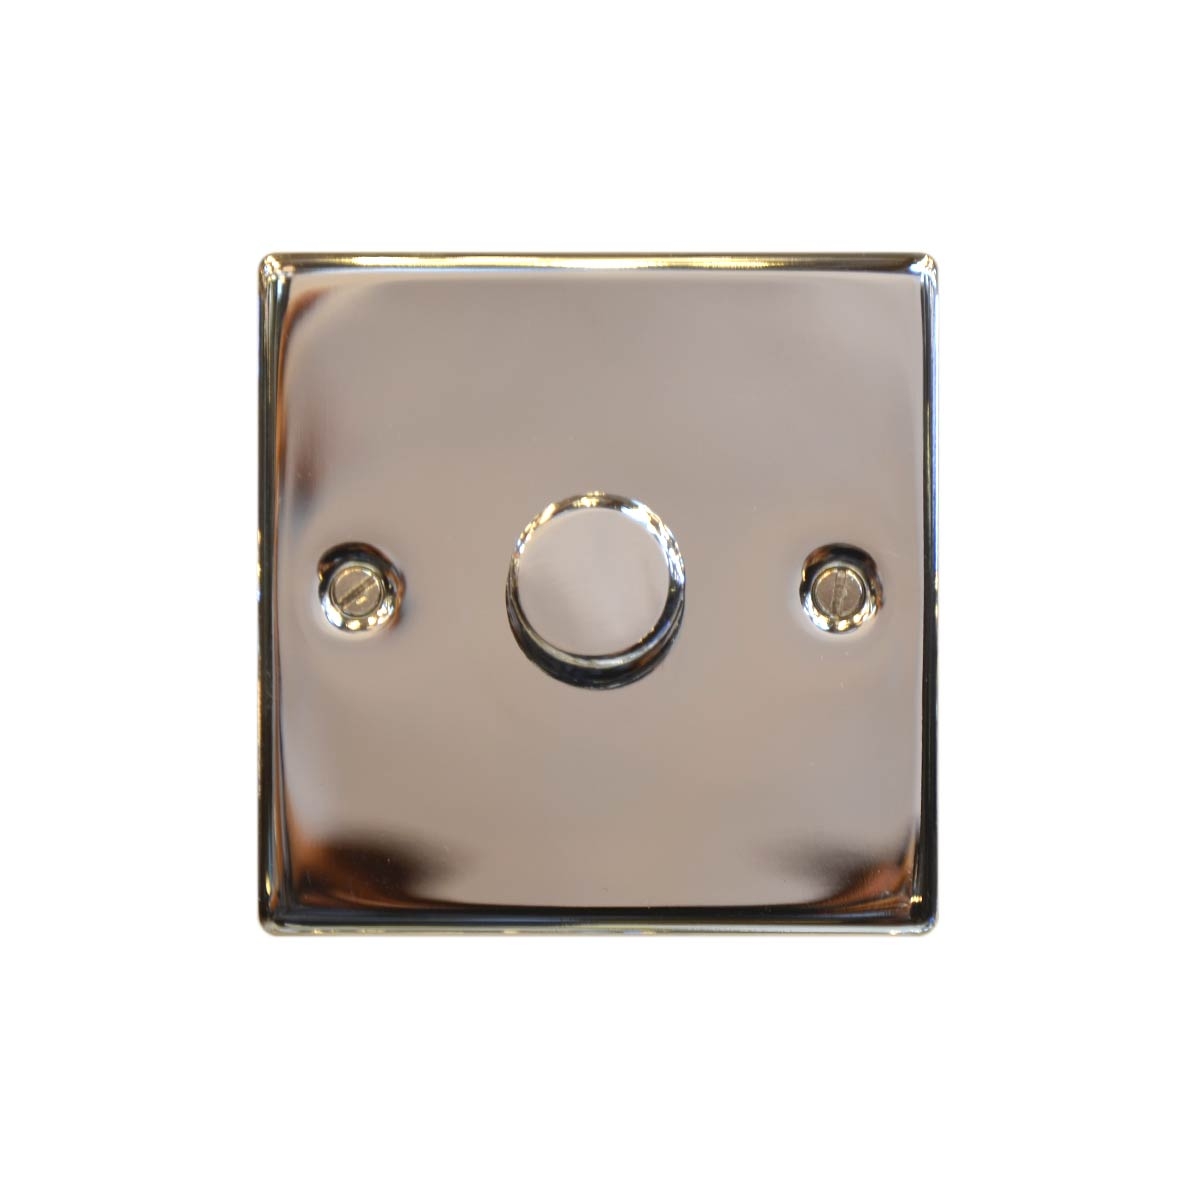 Dimmer Switch 1Gang 500W T355EB  - Chrome